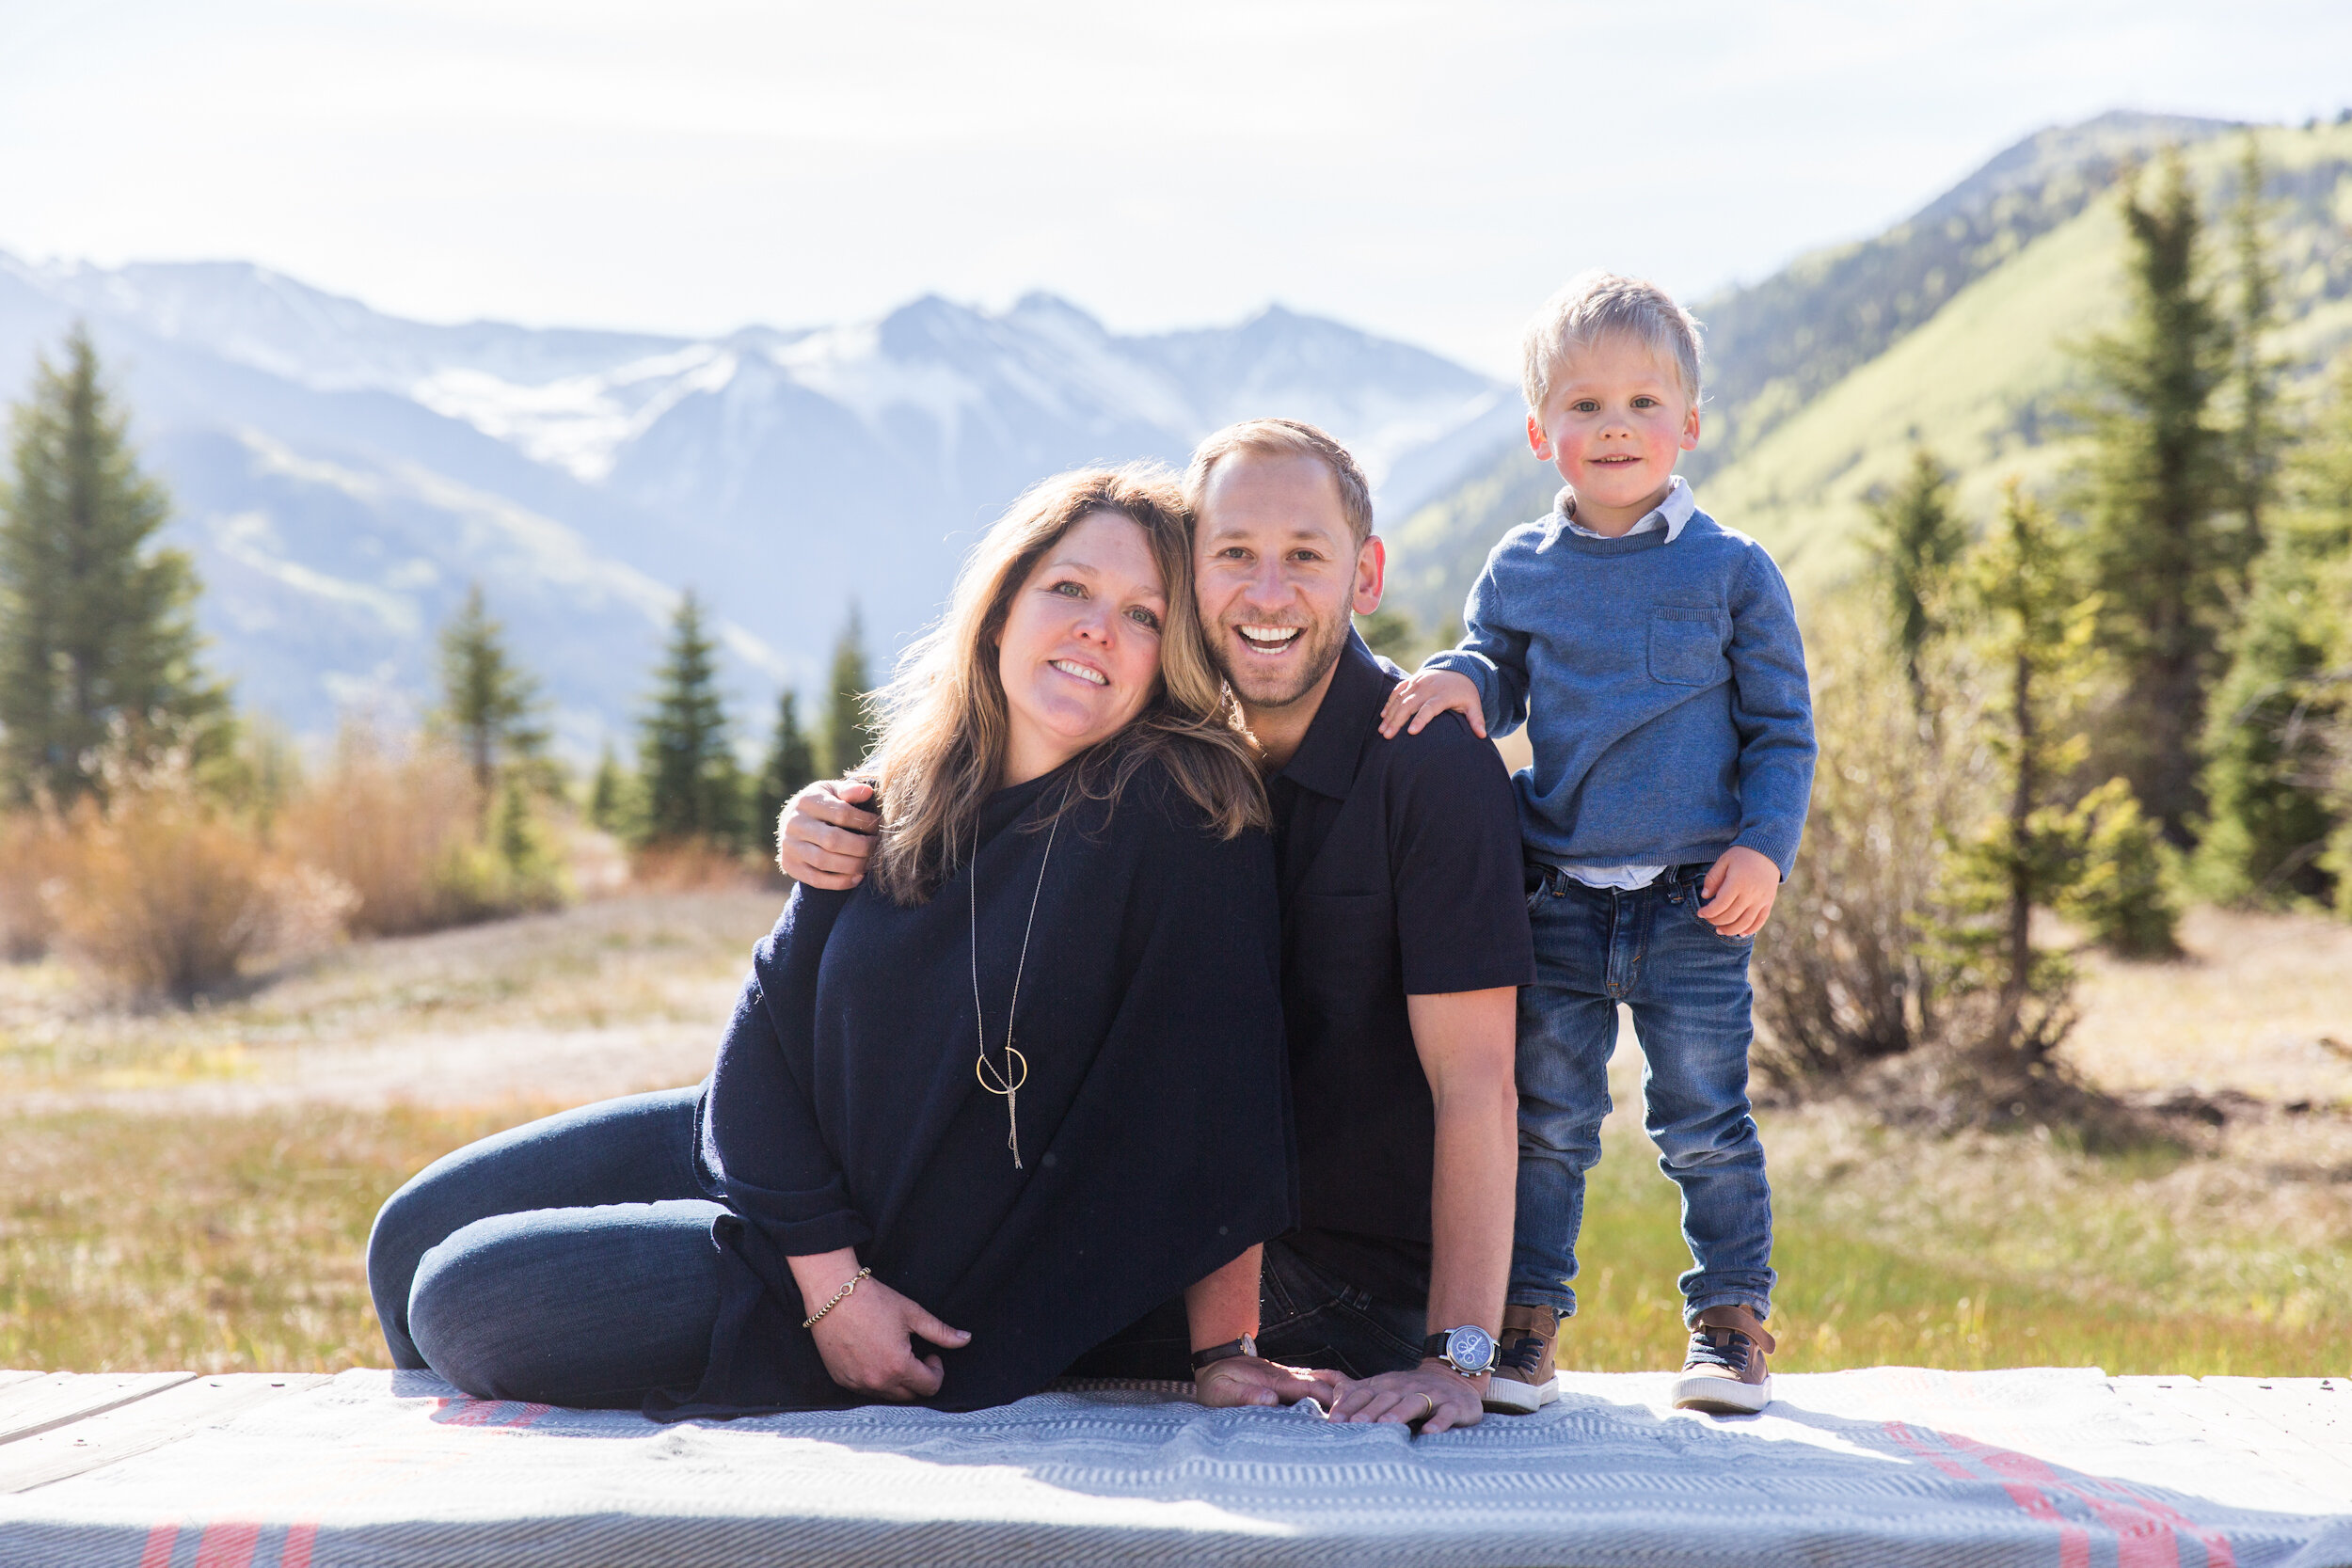 Telluride Family Photography - Afman Family 1 (Copy)